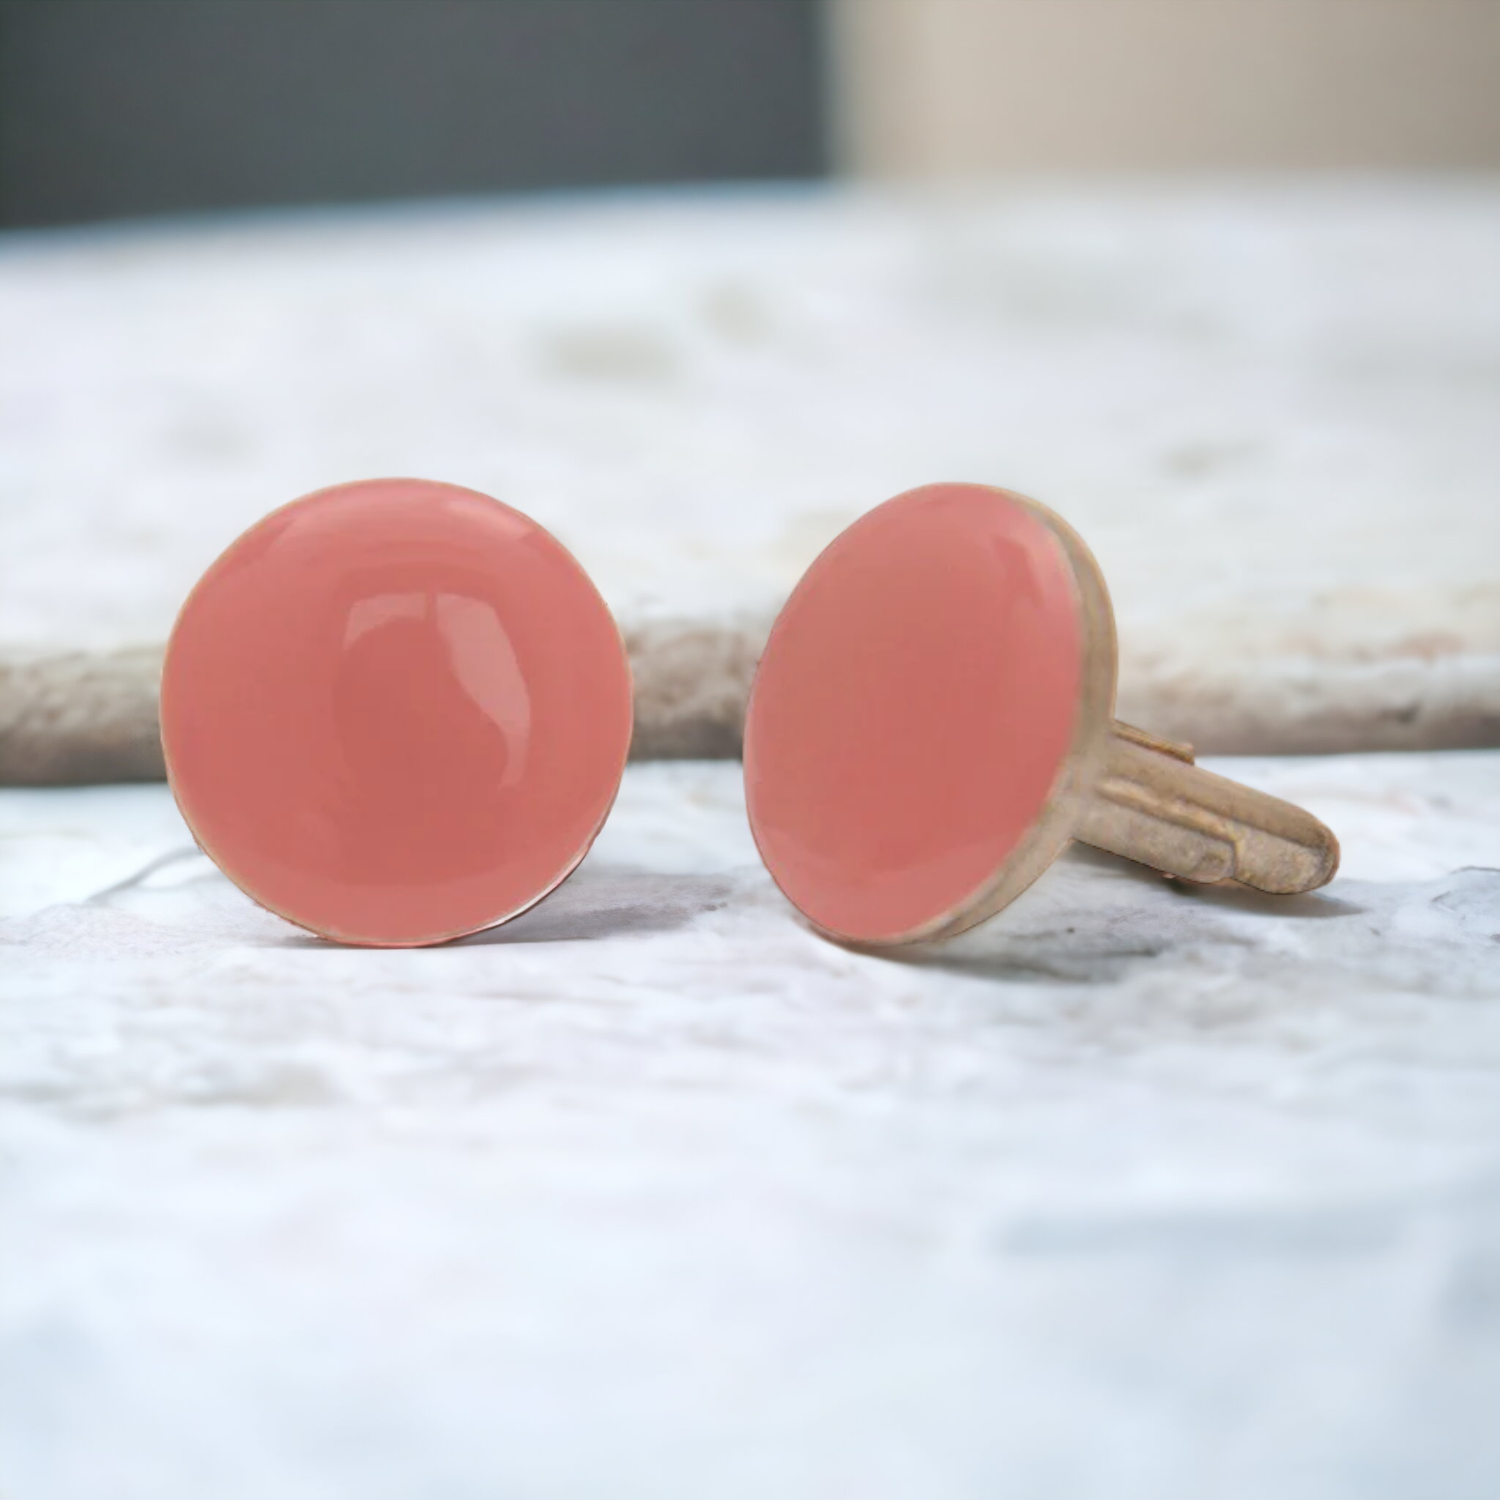 Chokore Old Rose Pink color Round shape Cufflinks